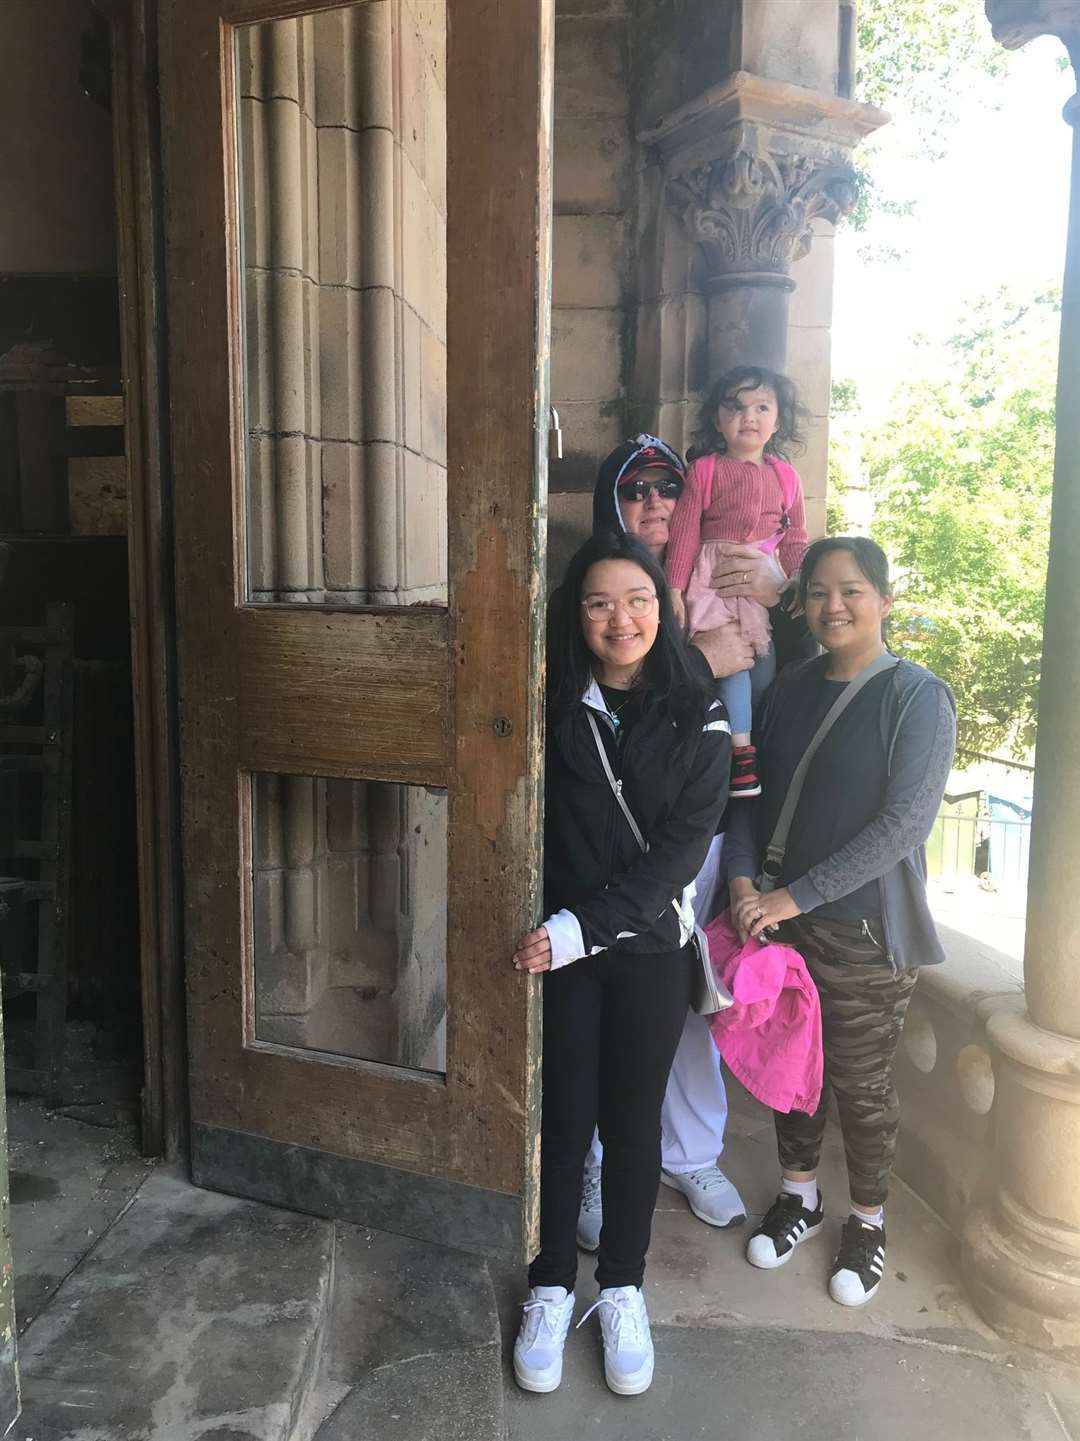 Opening the doors of the Picture House with her family.